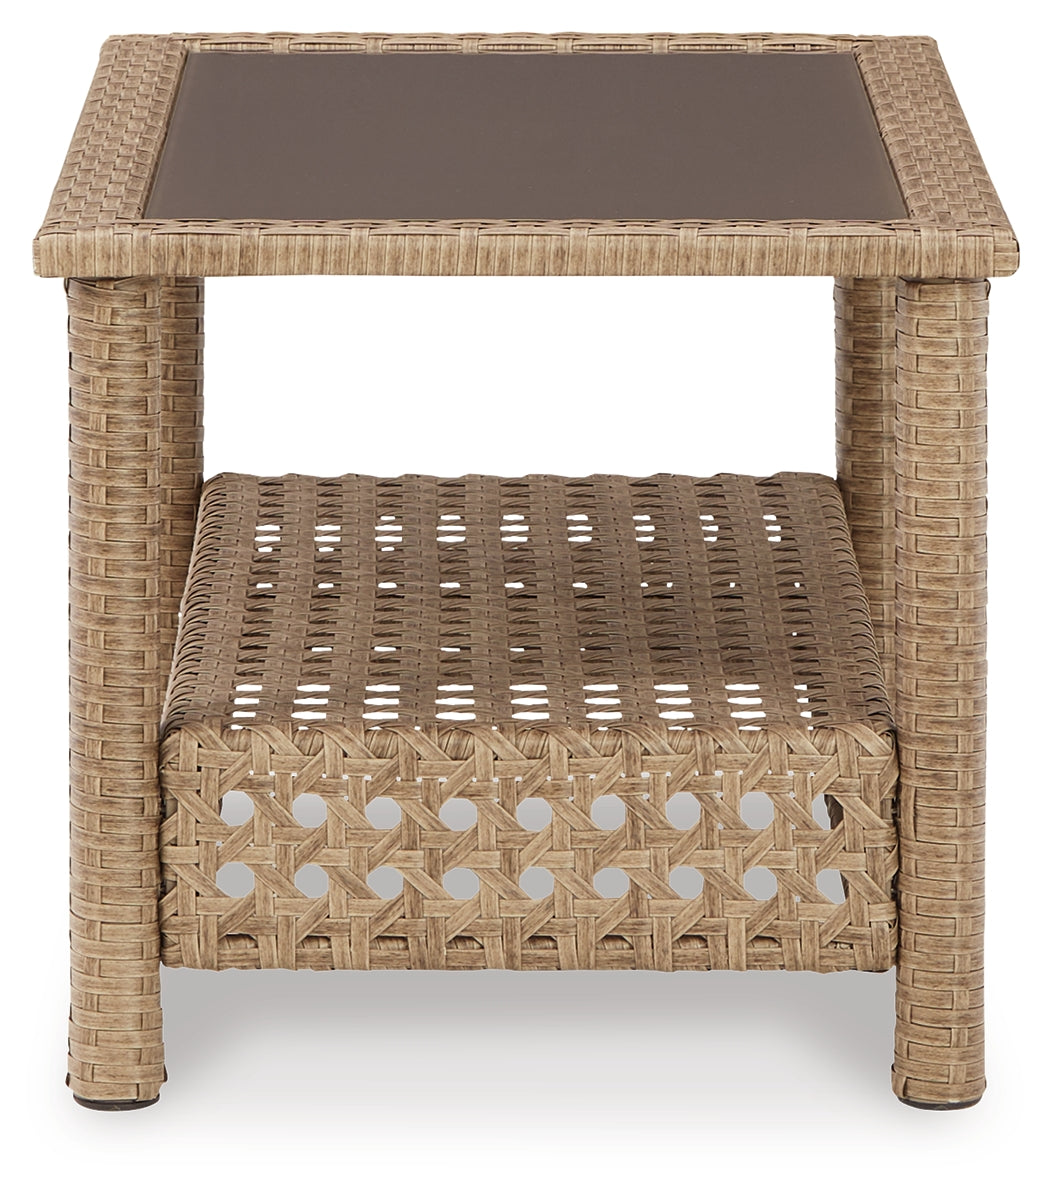 Braylee Outdoor Loveseat and 2 Chairs with Coffee Table